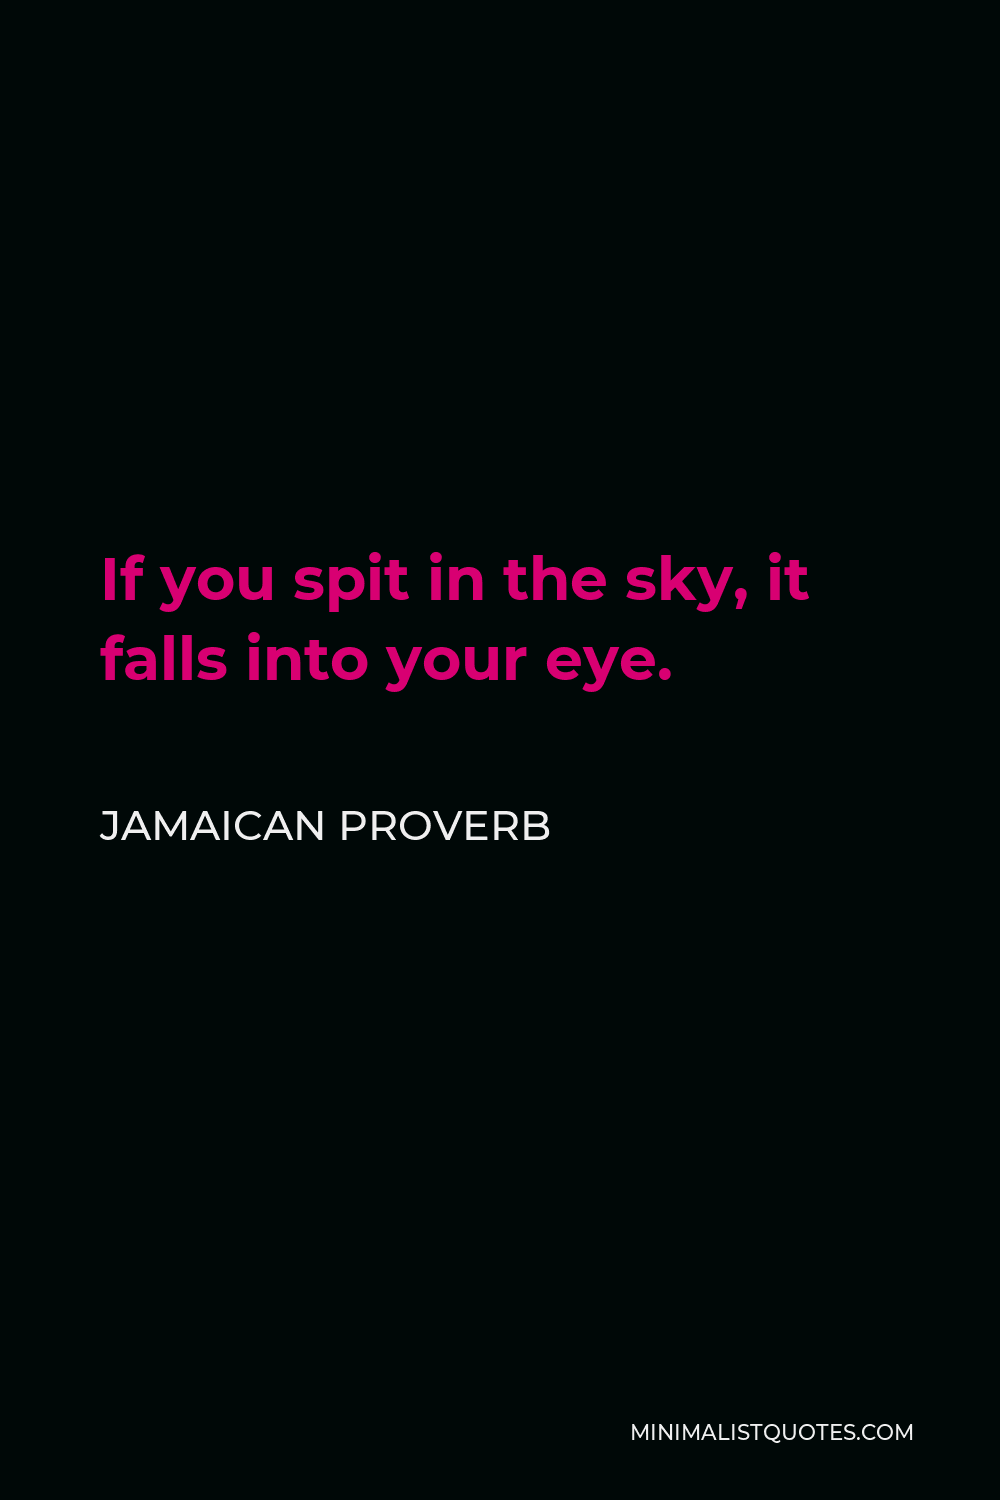 Jamaican Proverb Quote - If you spit in the sky, it falls into your eye.